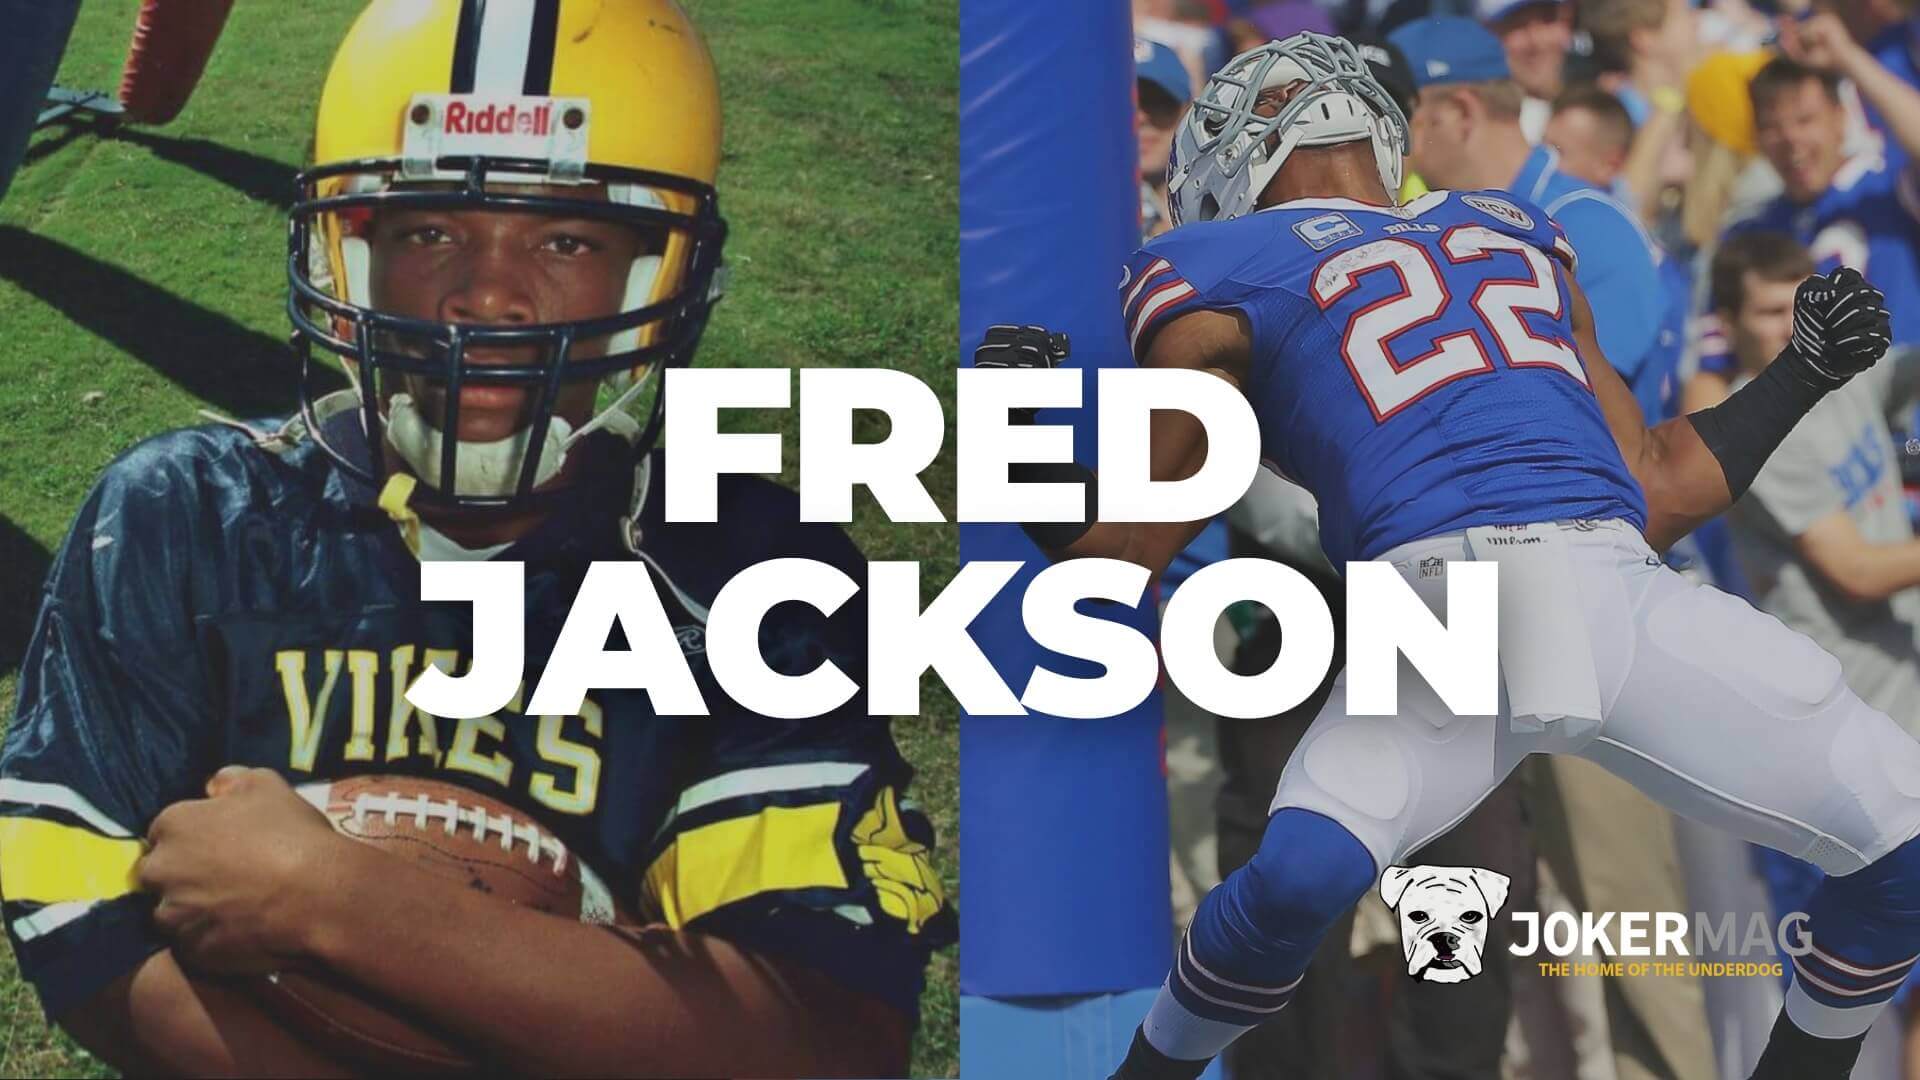 Fred Jackson went from undersized high school backup to NFL running back